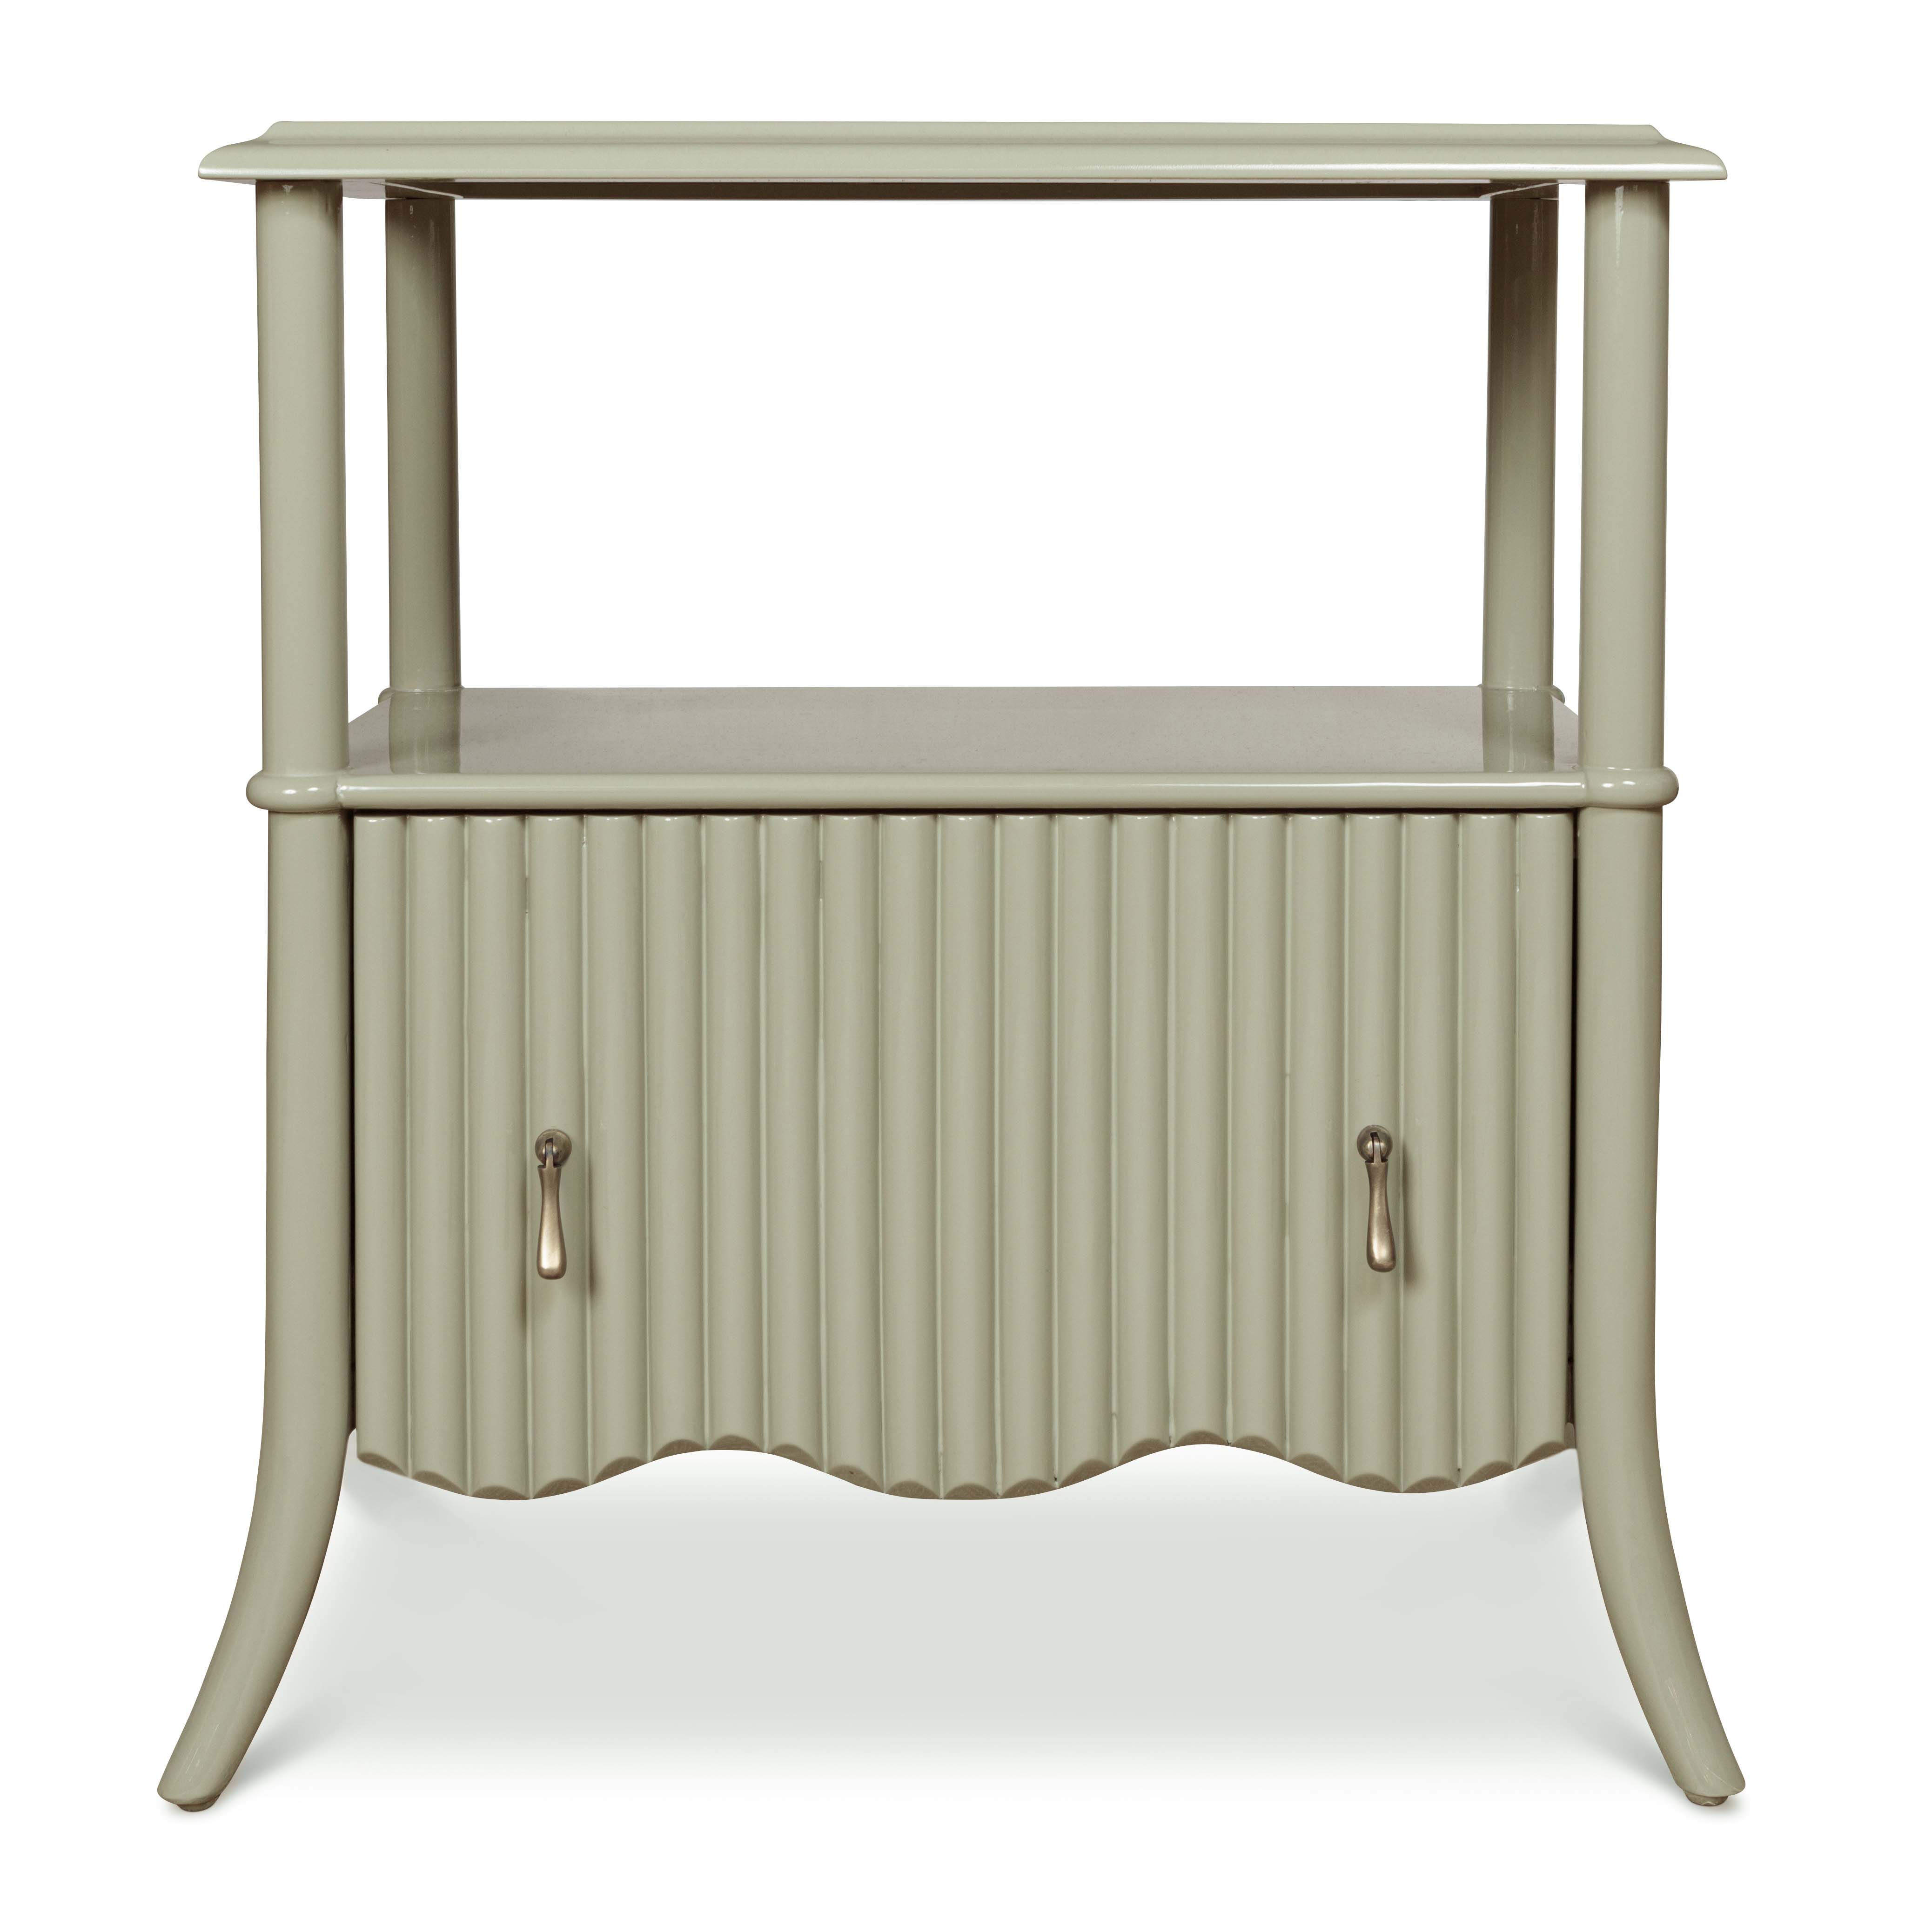 A pistachio-coloured, bamboo-style wooden bedside table with pull handles.